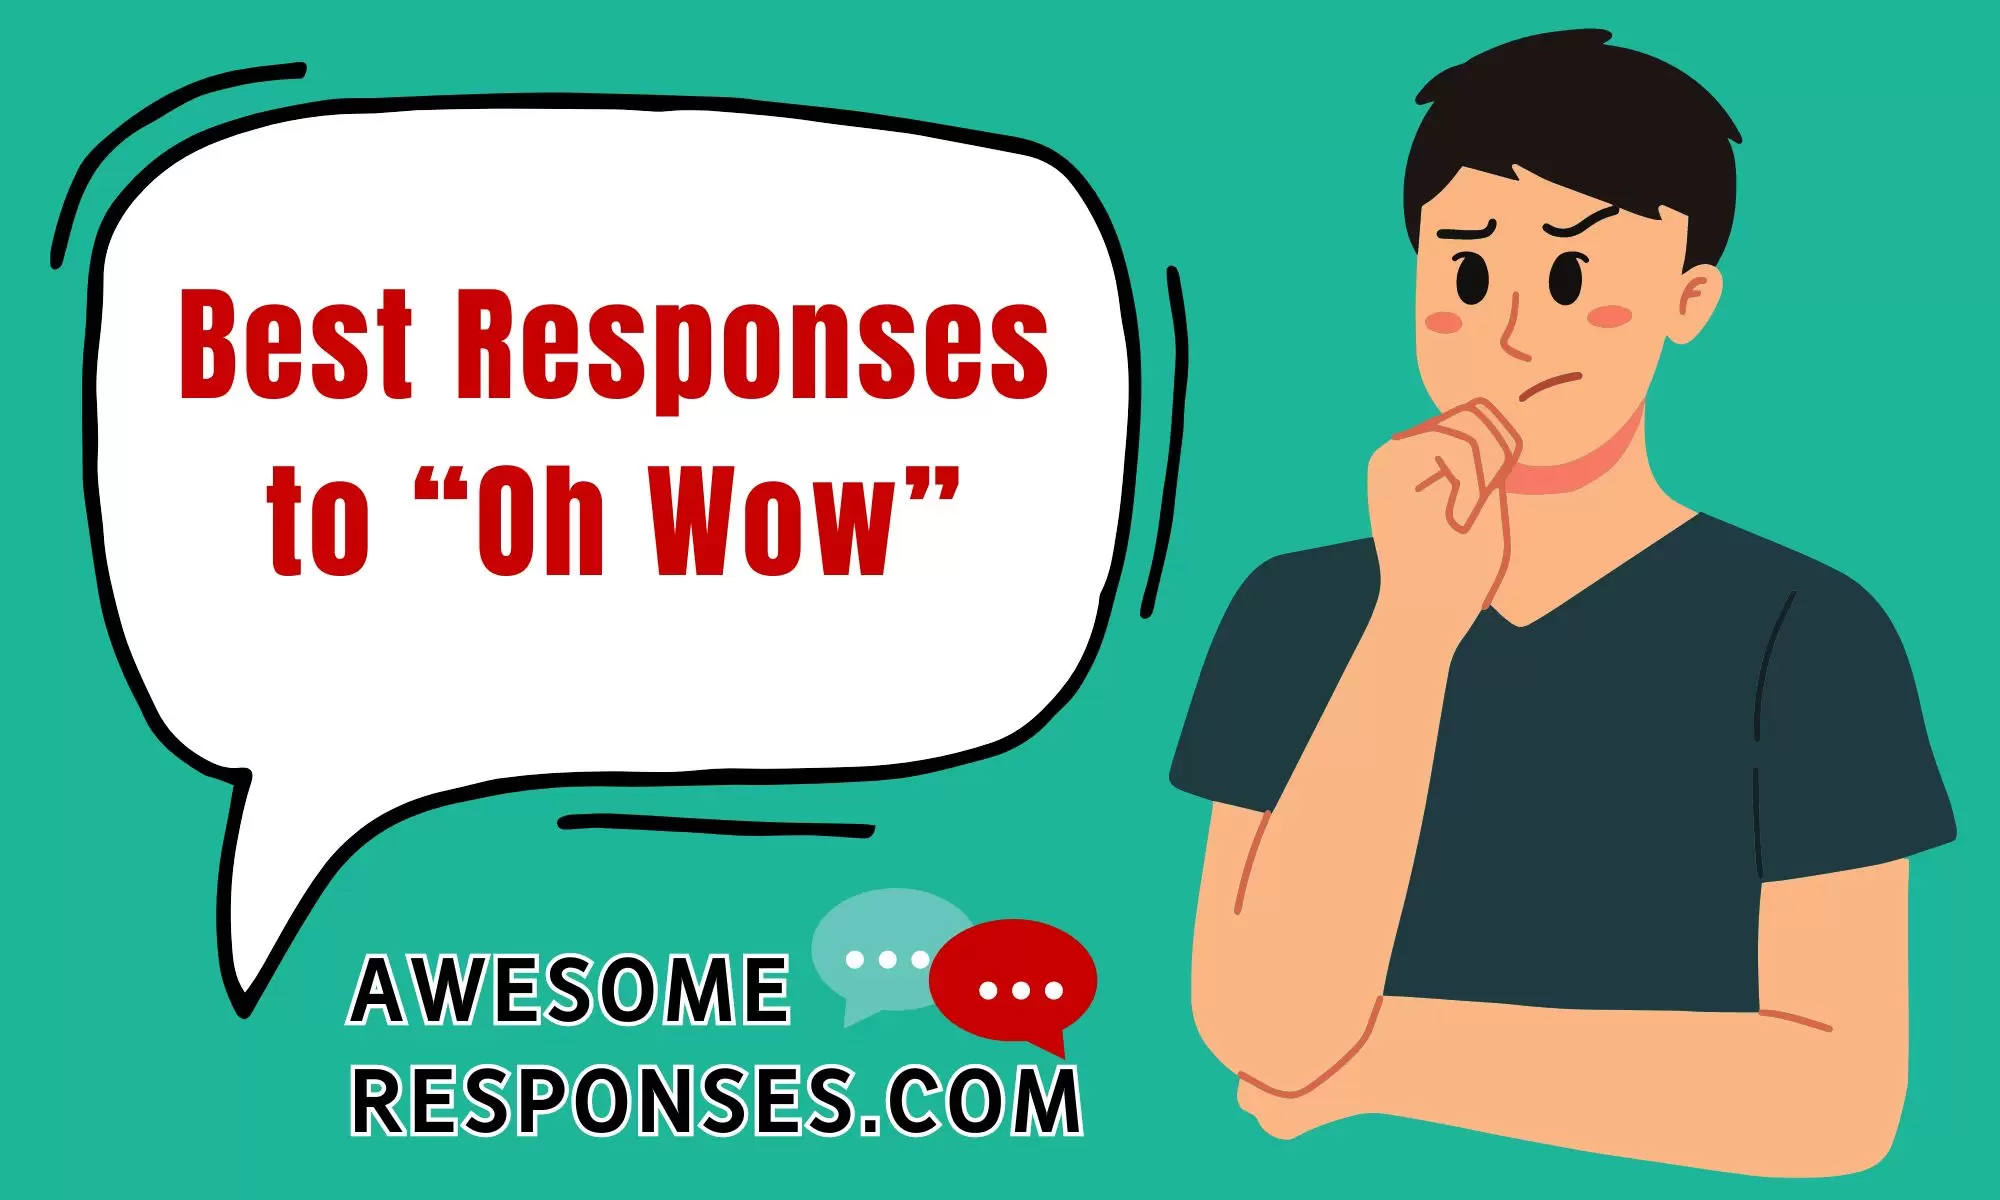 Best Responses to “Oh Wow”